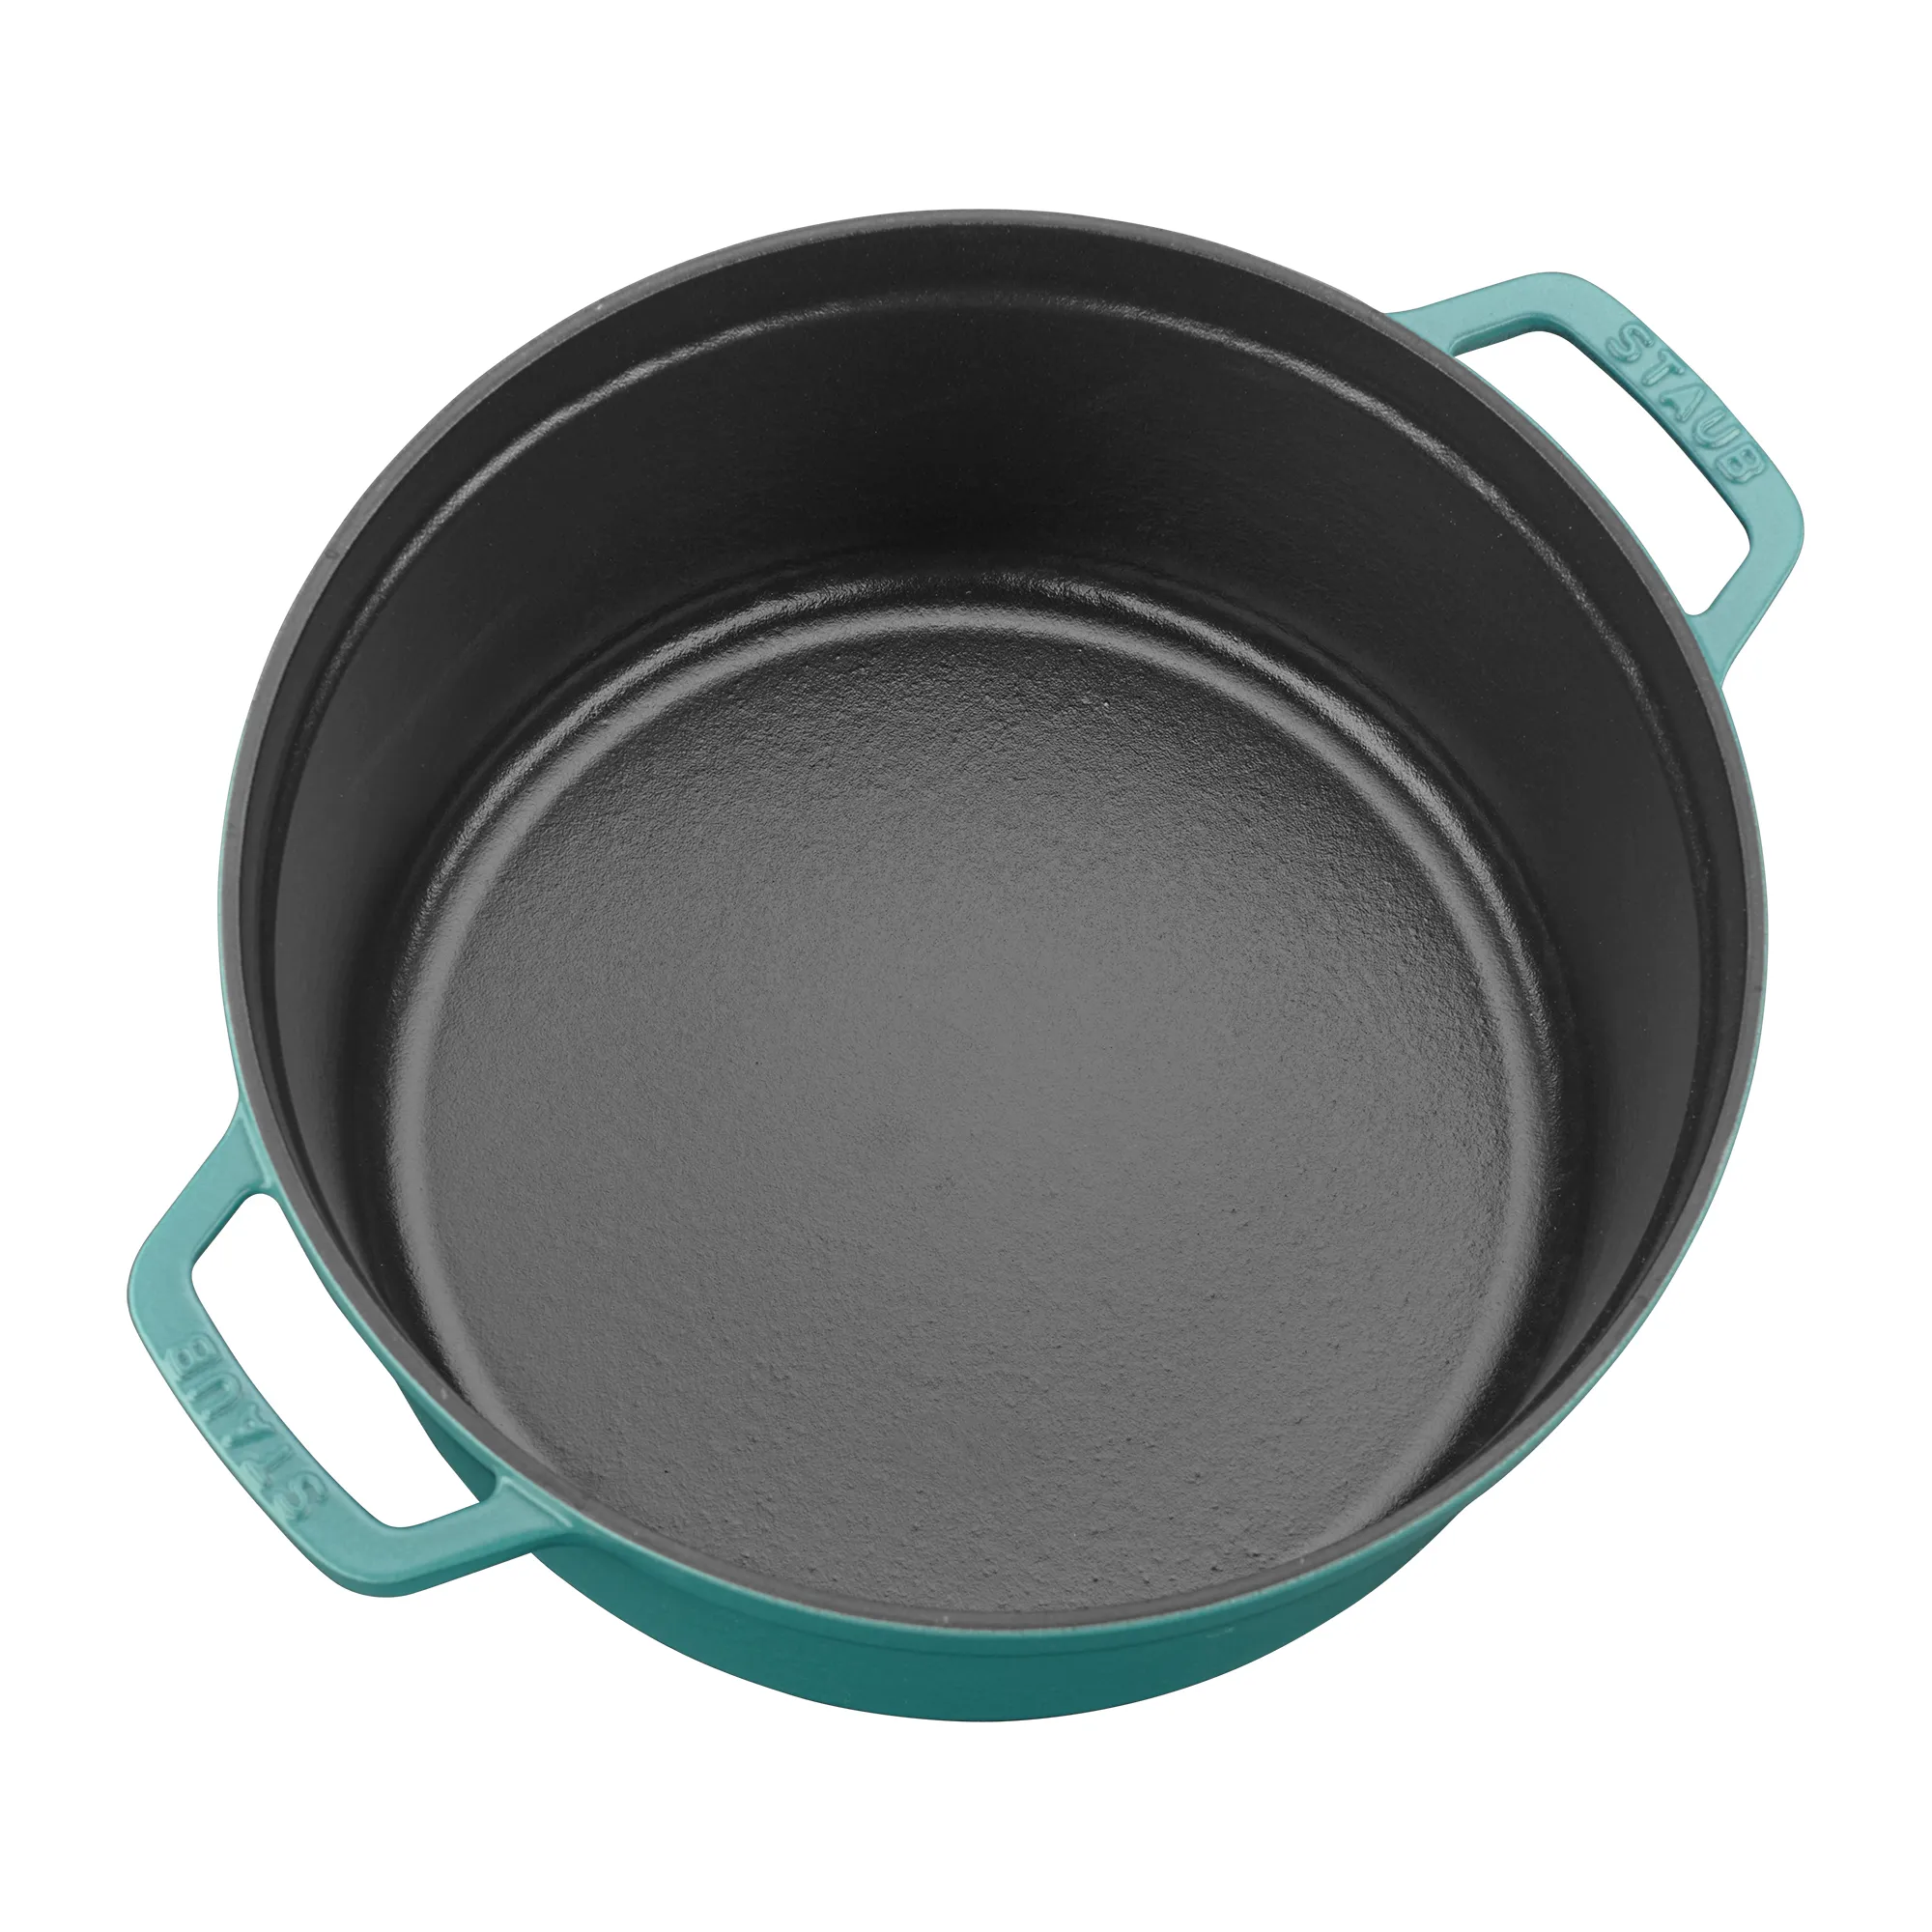 https://www.homethreads.com/files/zwilling/11026105-staub-cast-iron-55-qt-round-cocotte-turquoise-2.webp